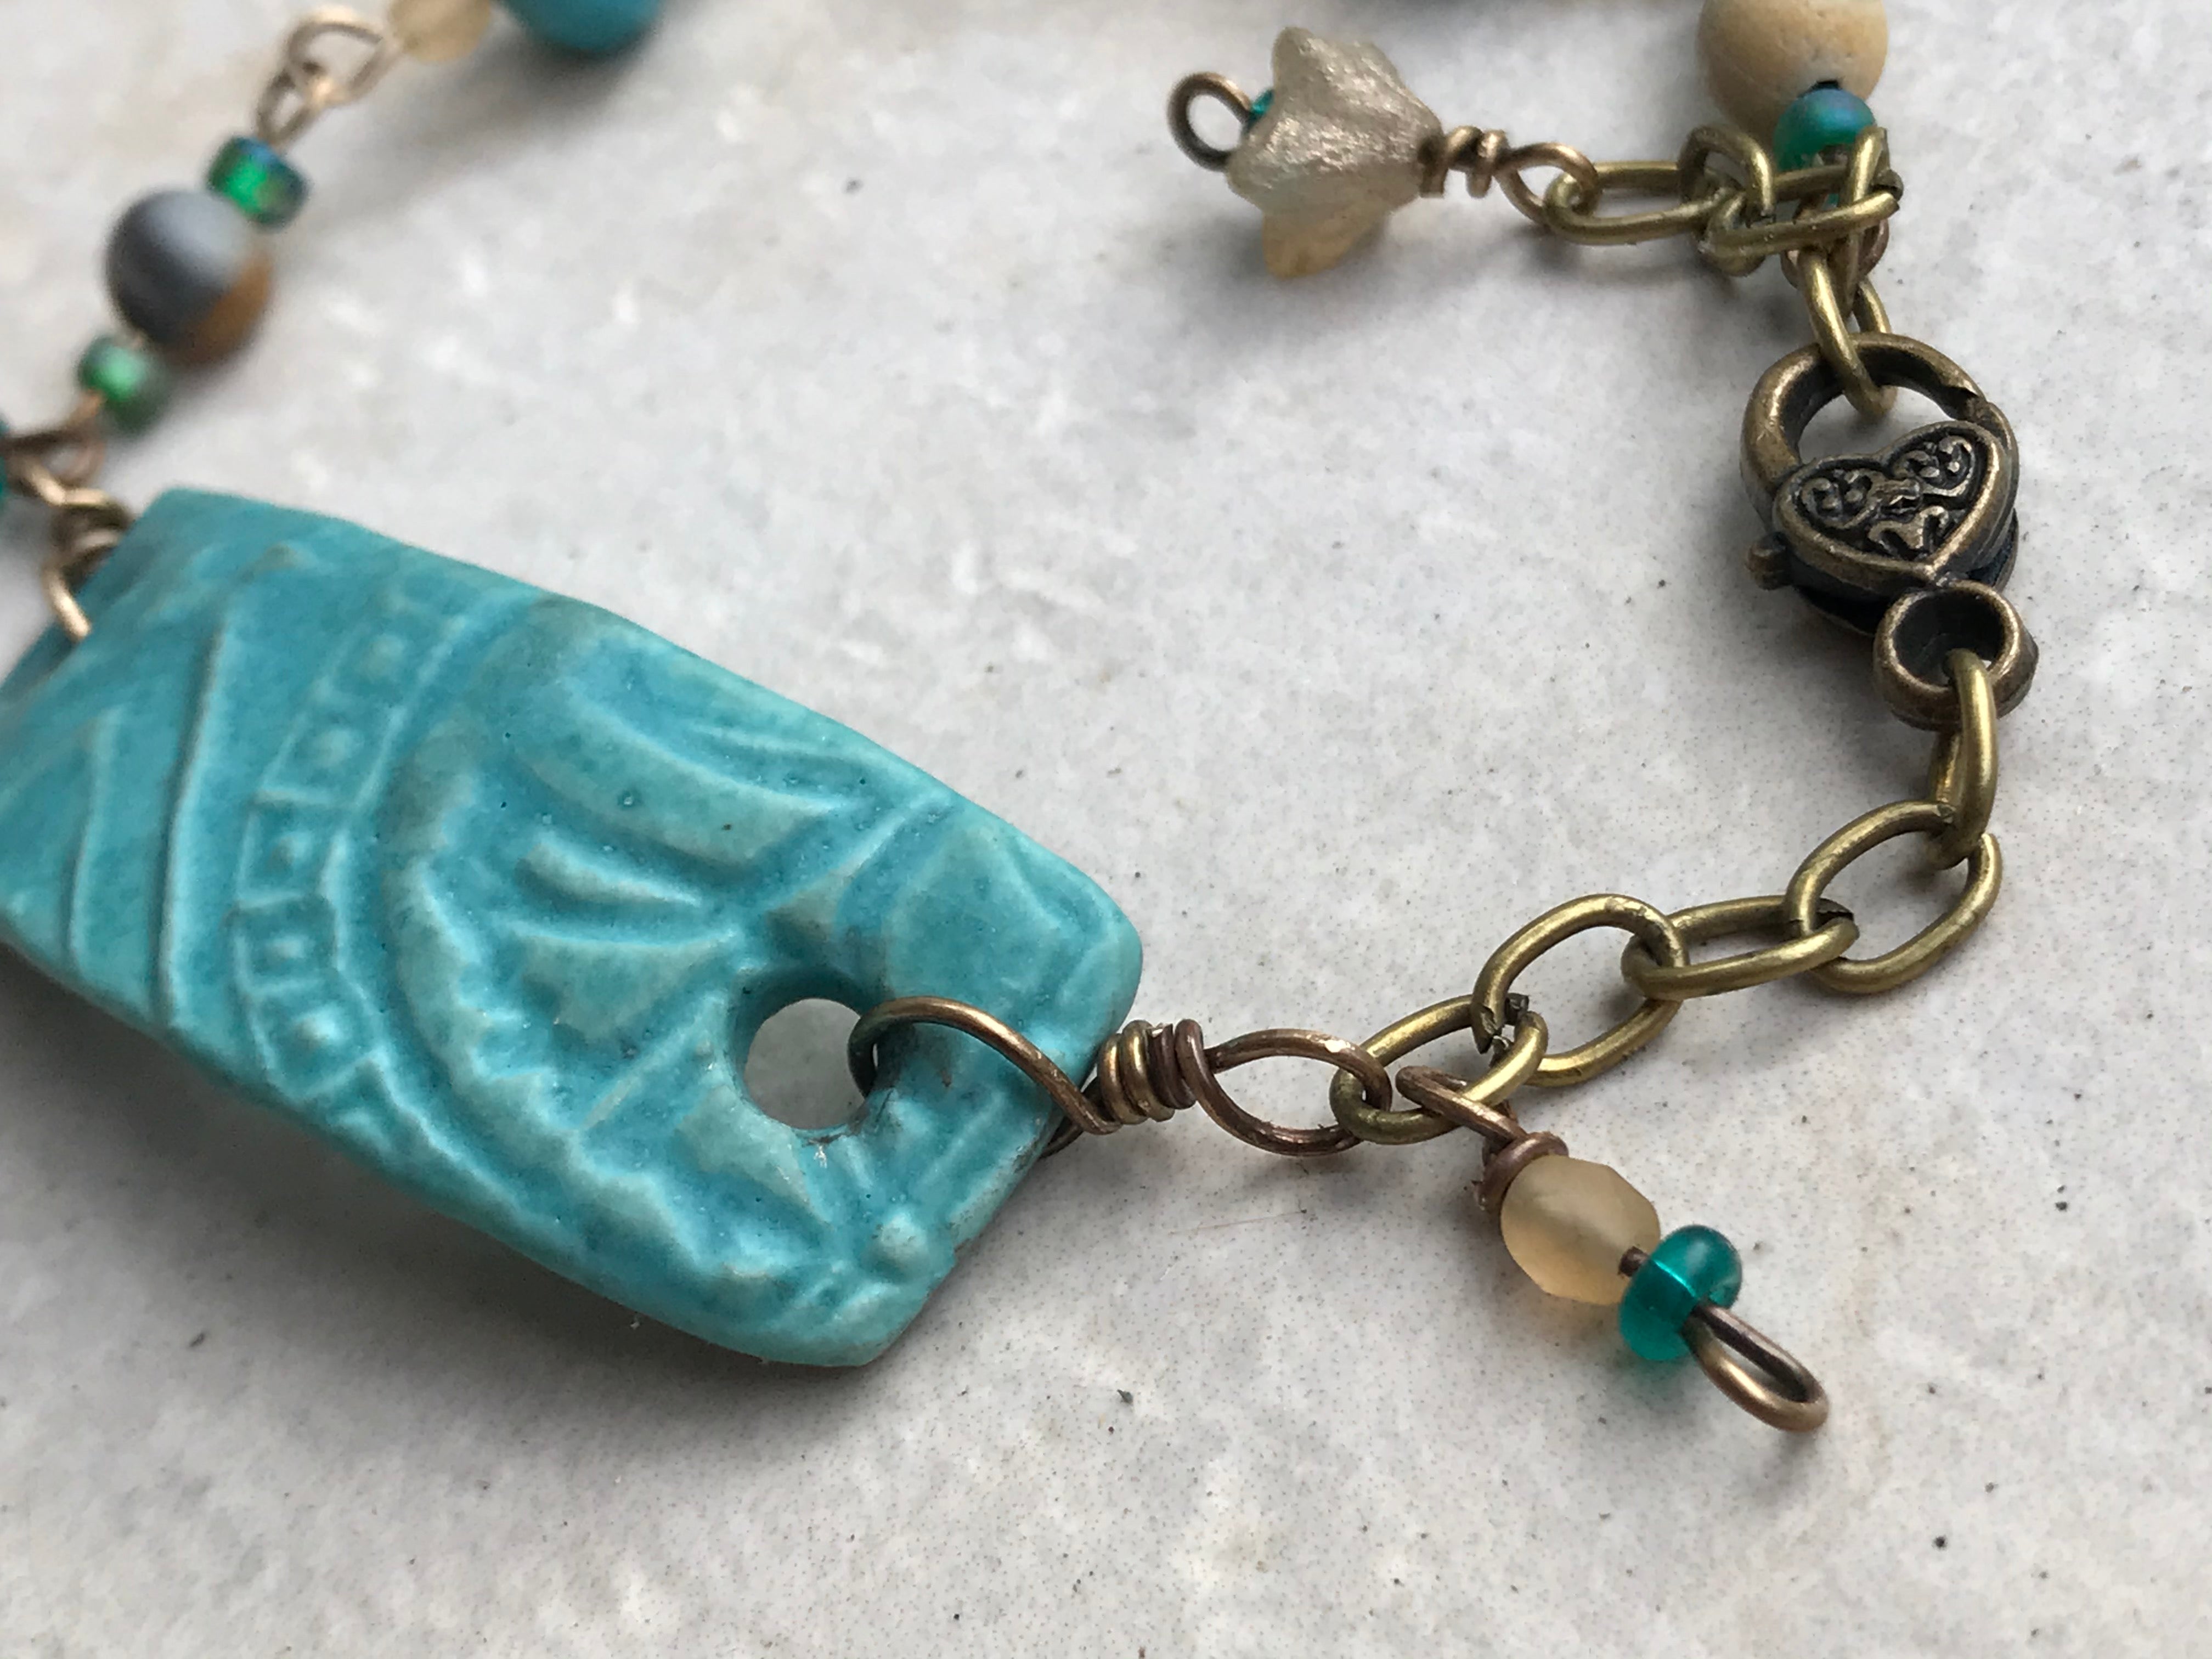 Porcelain Turquoise Beaded Bracelet with Cream Accents